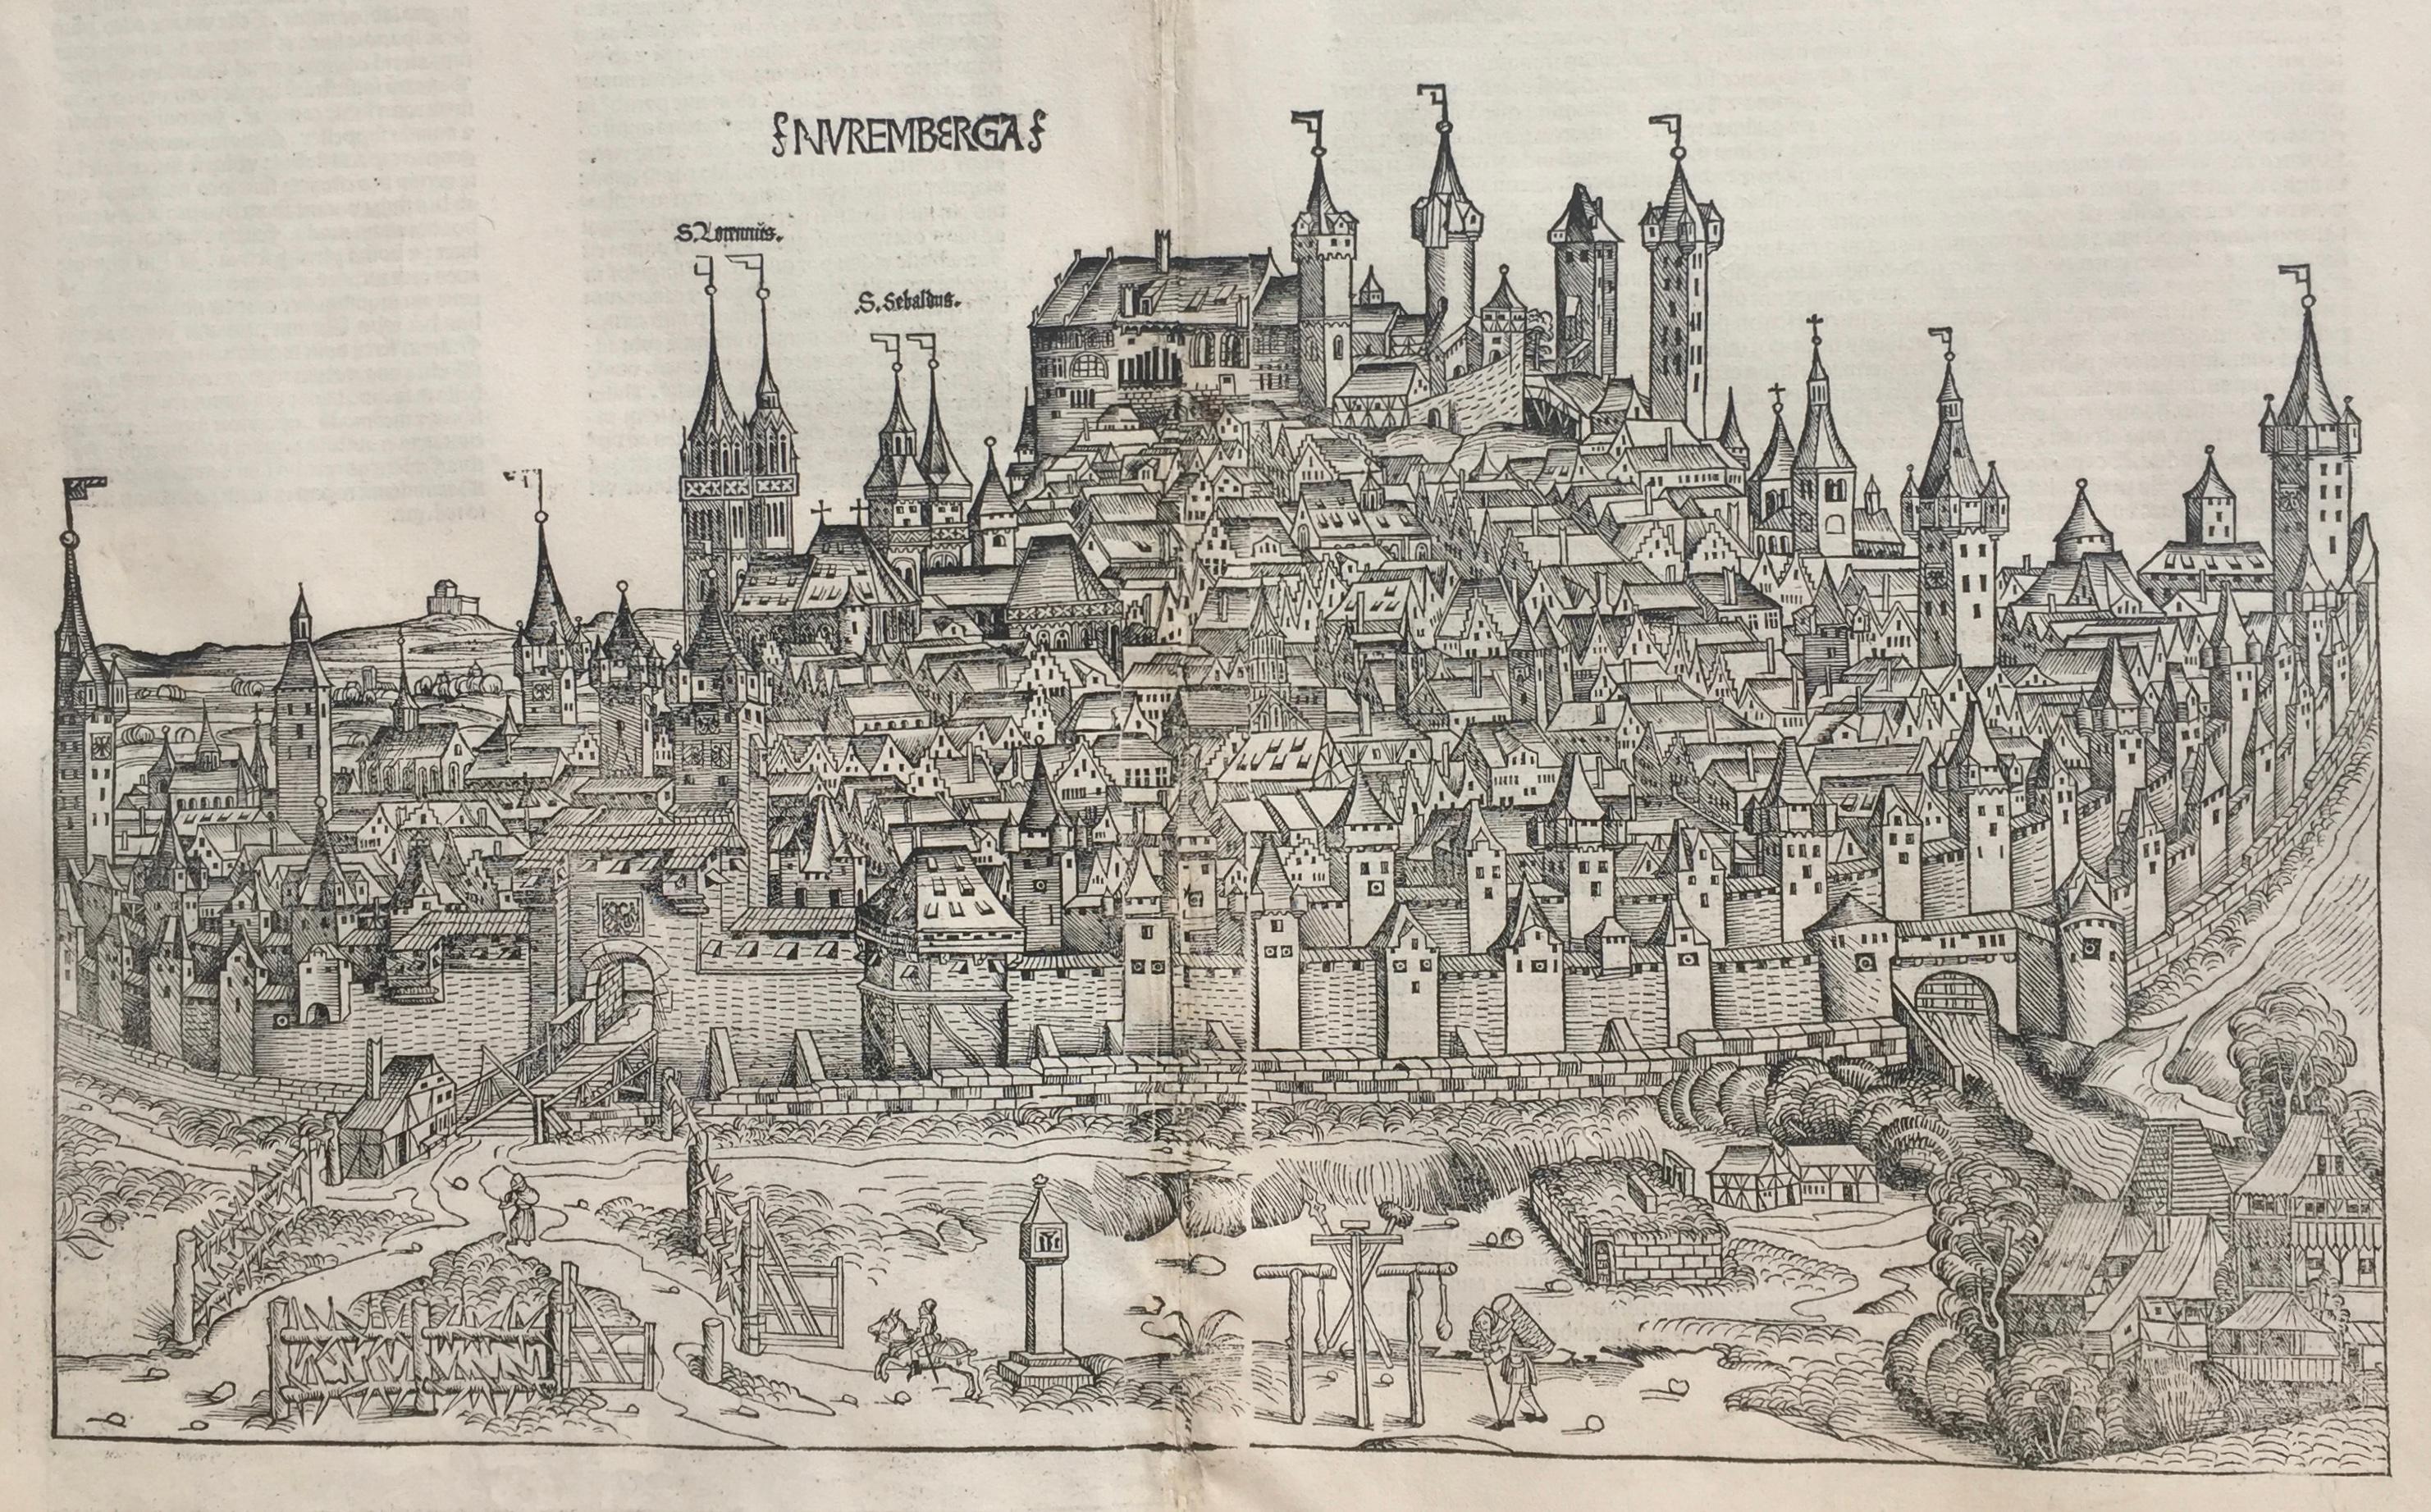 Unknown Landscape Print - View of Nuremberg from Nuremberg Chronicle - 527 years old